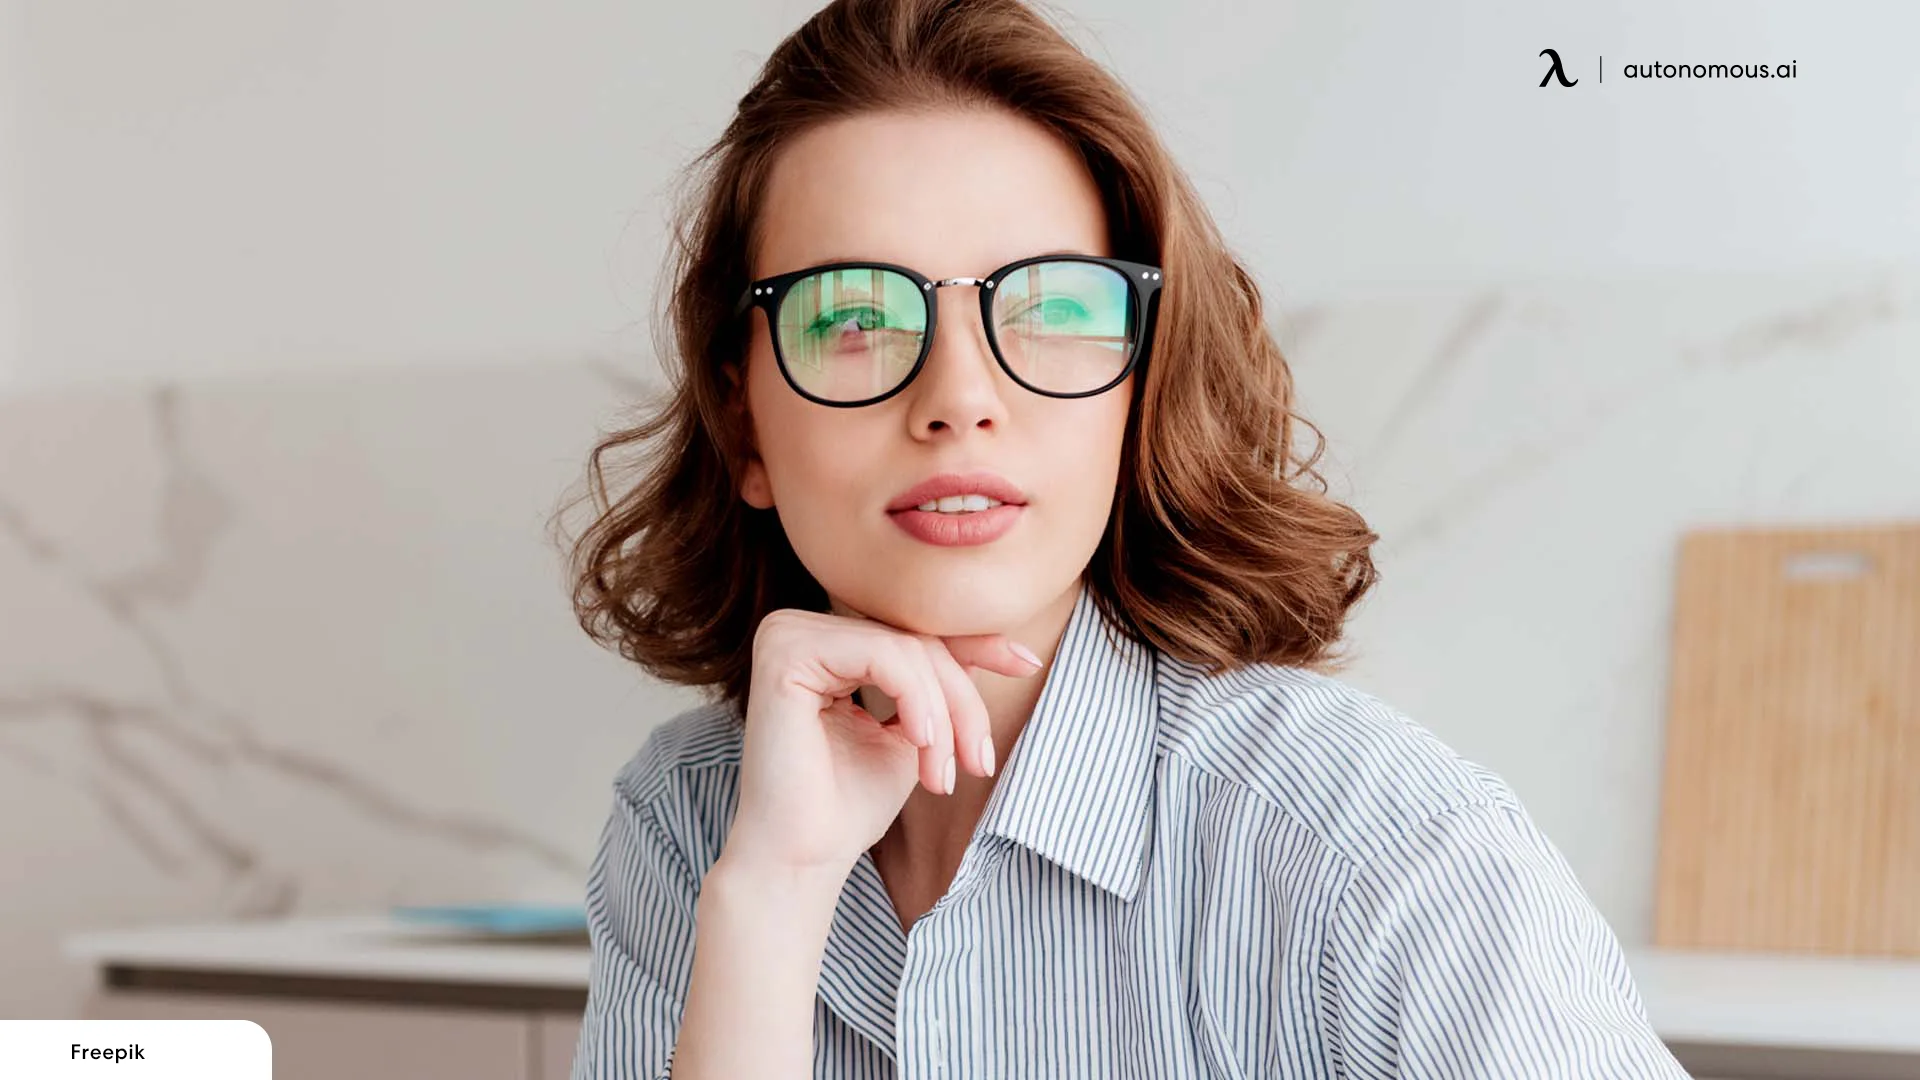 Is it possible to cure farsightedness completely?